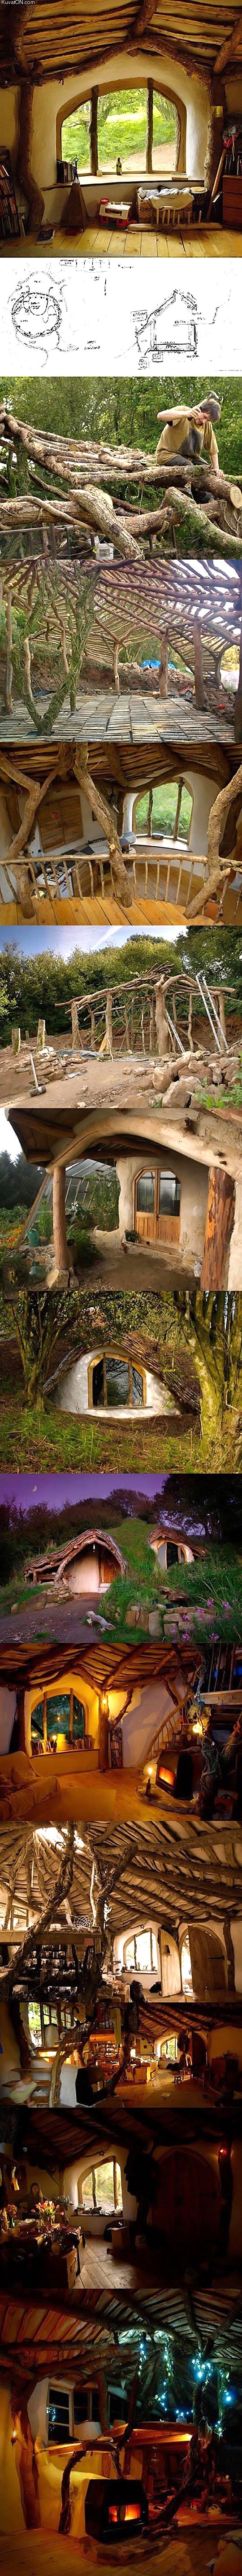 here_s_how_to_build_a_hobbit_house.jpg